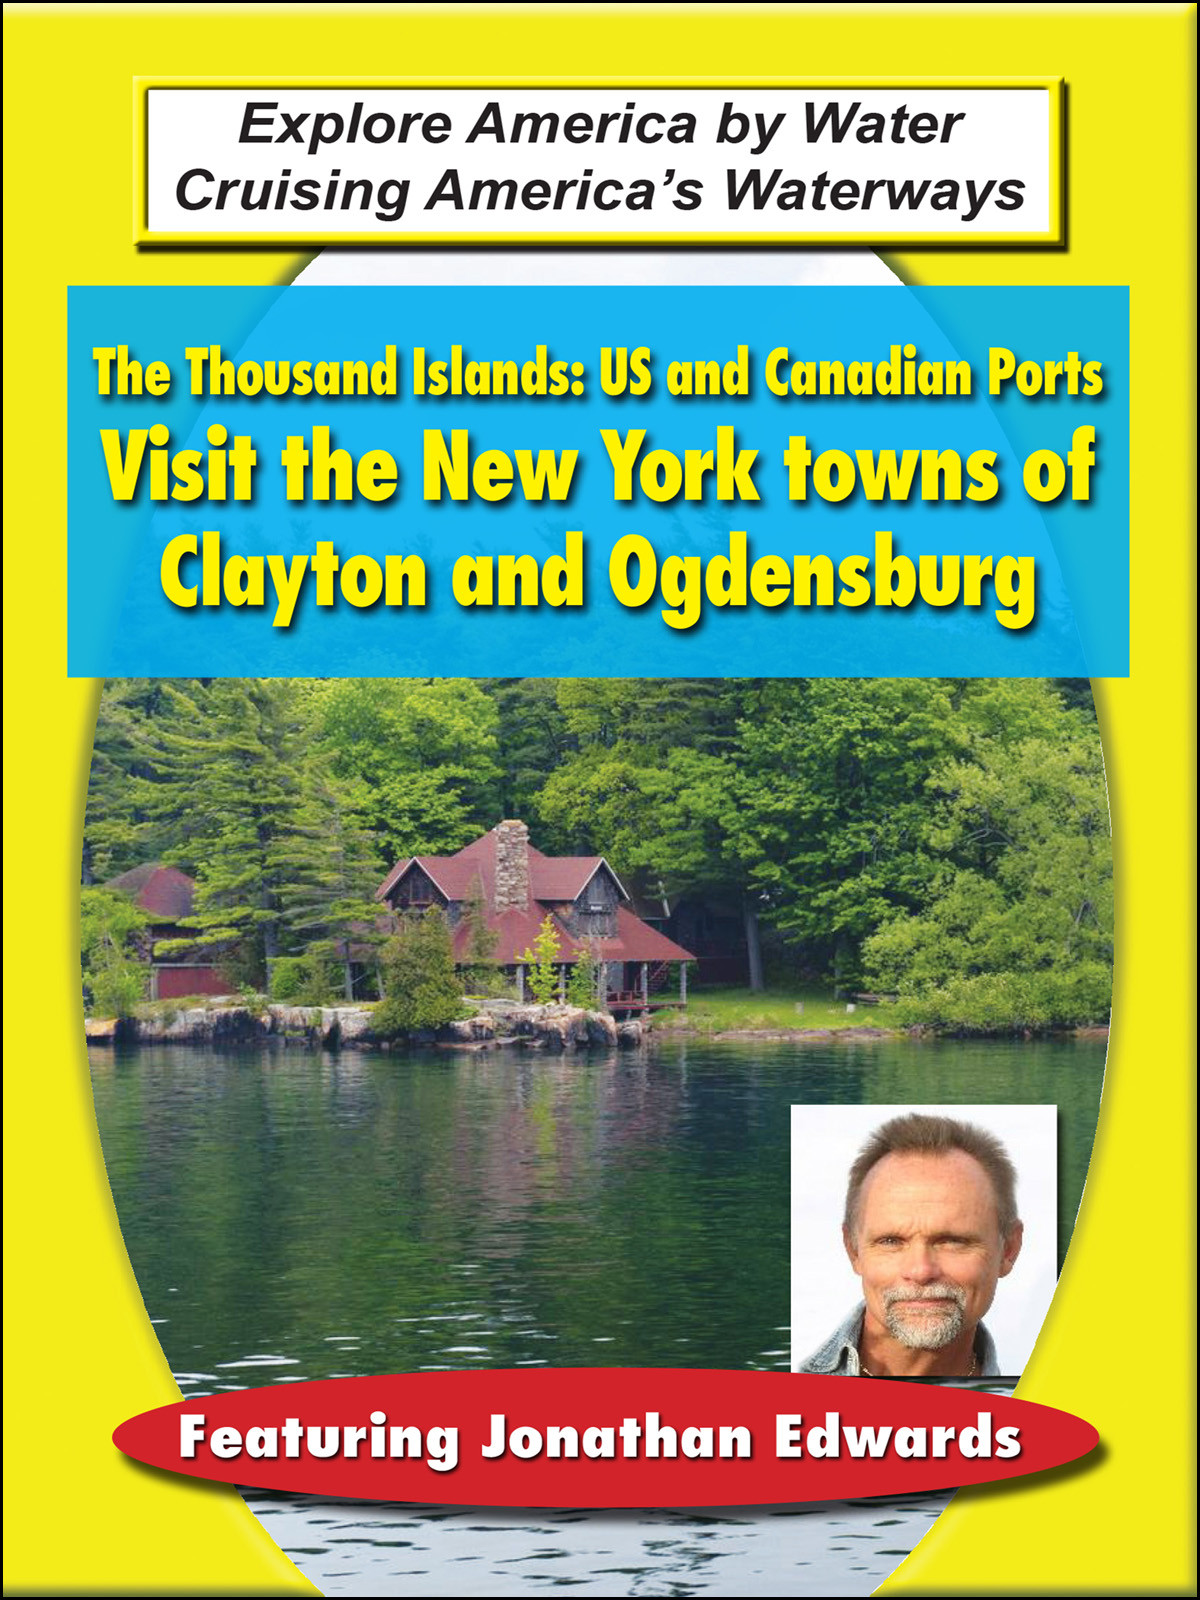 T8906 - The Thousand Islands US and Canadian Ports - Visit the New York towns of Clayton and Ogdensburg